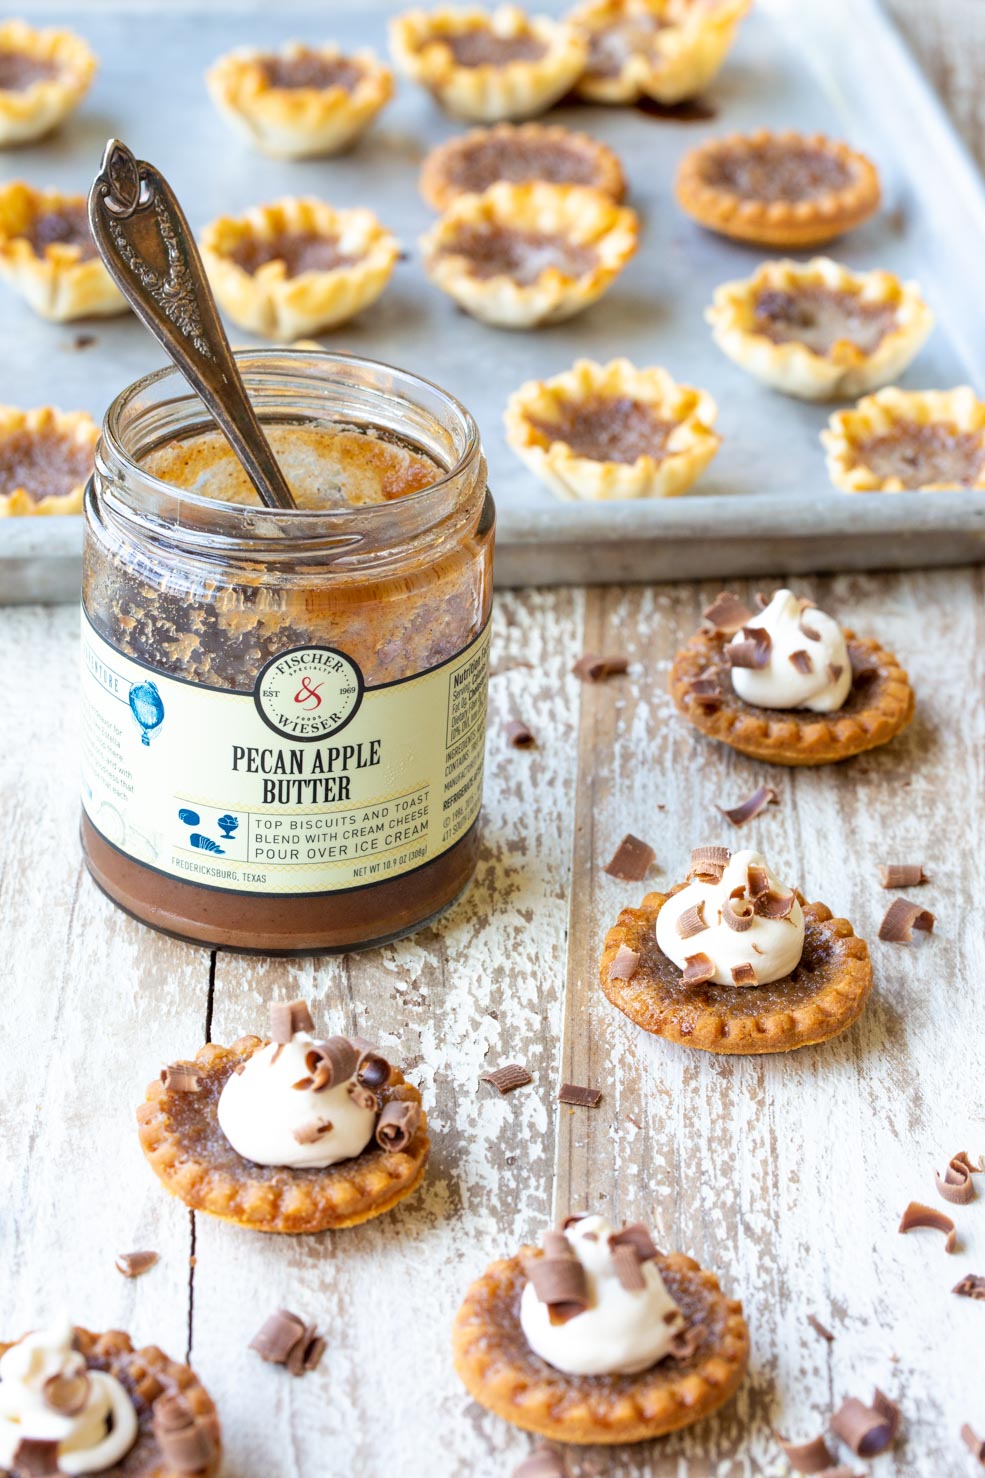 Pecan Apple Butter Tarts Recipe - Completed and decorated tarts